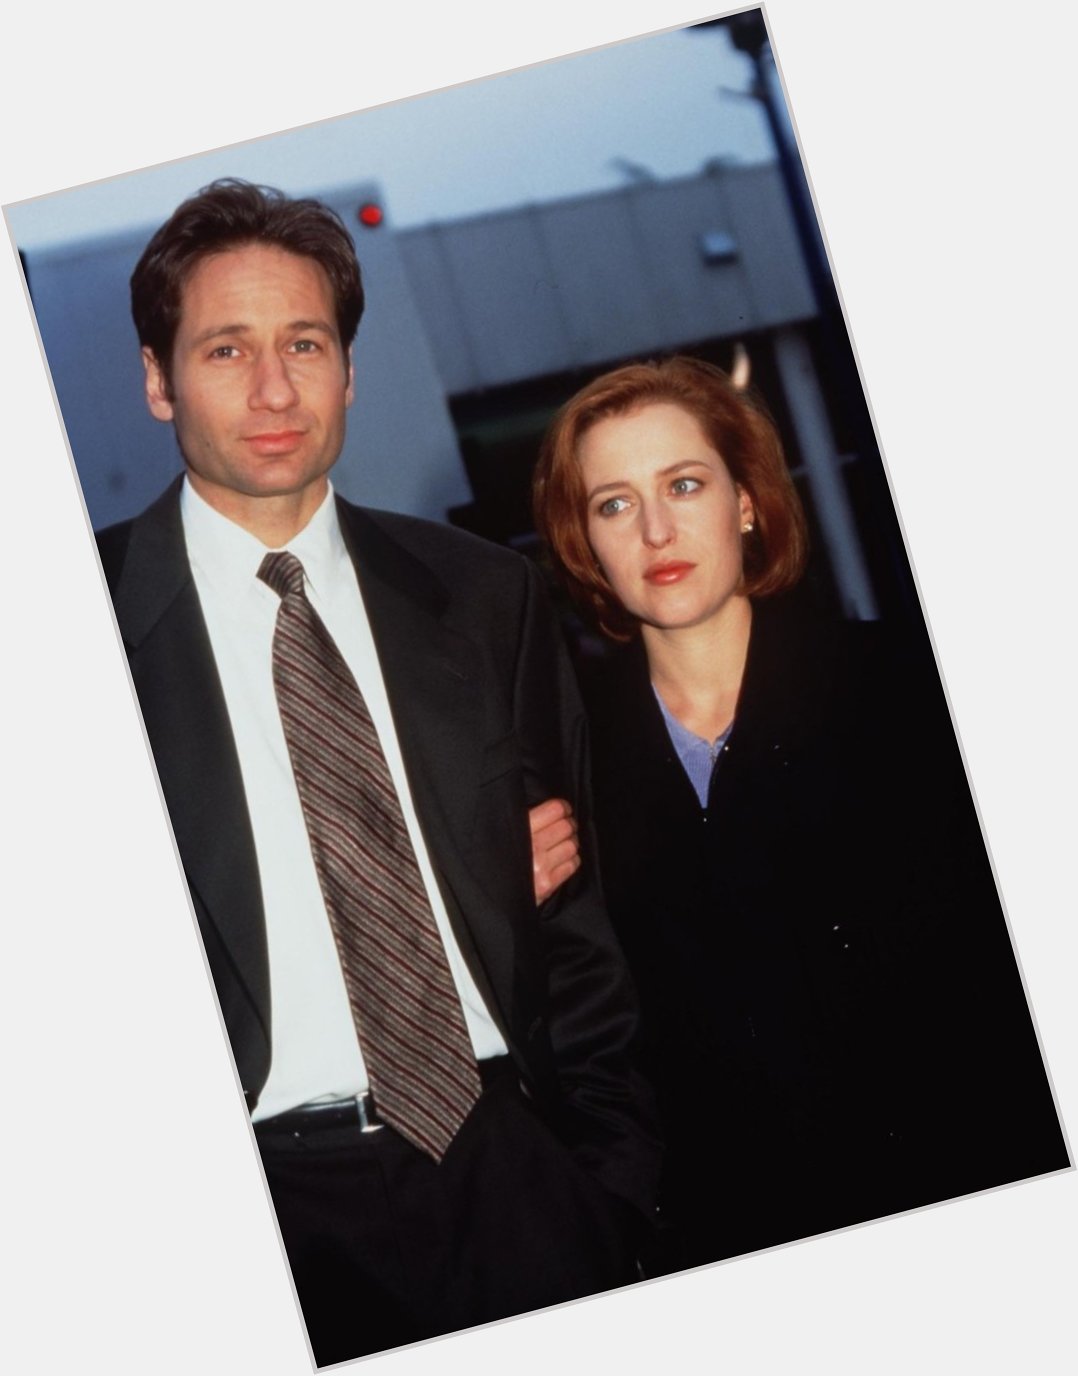 Since it\s august 7 here already, happy birthday david duchovny 